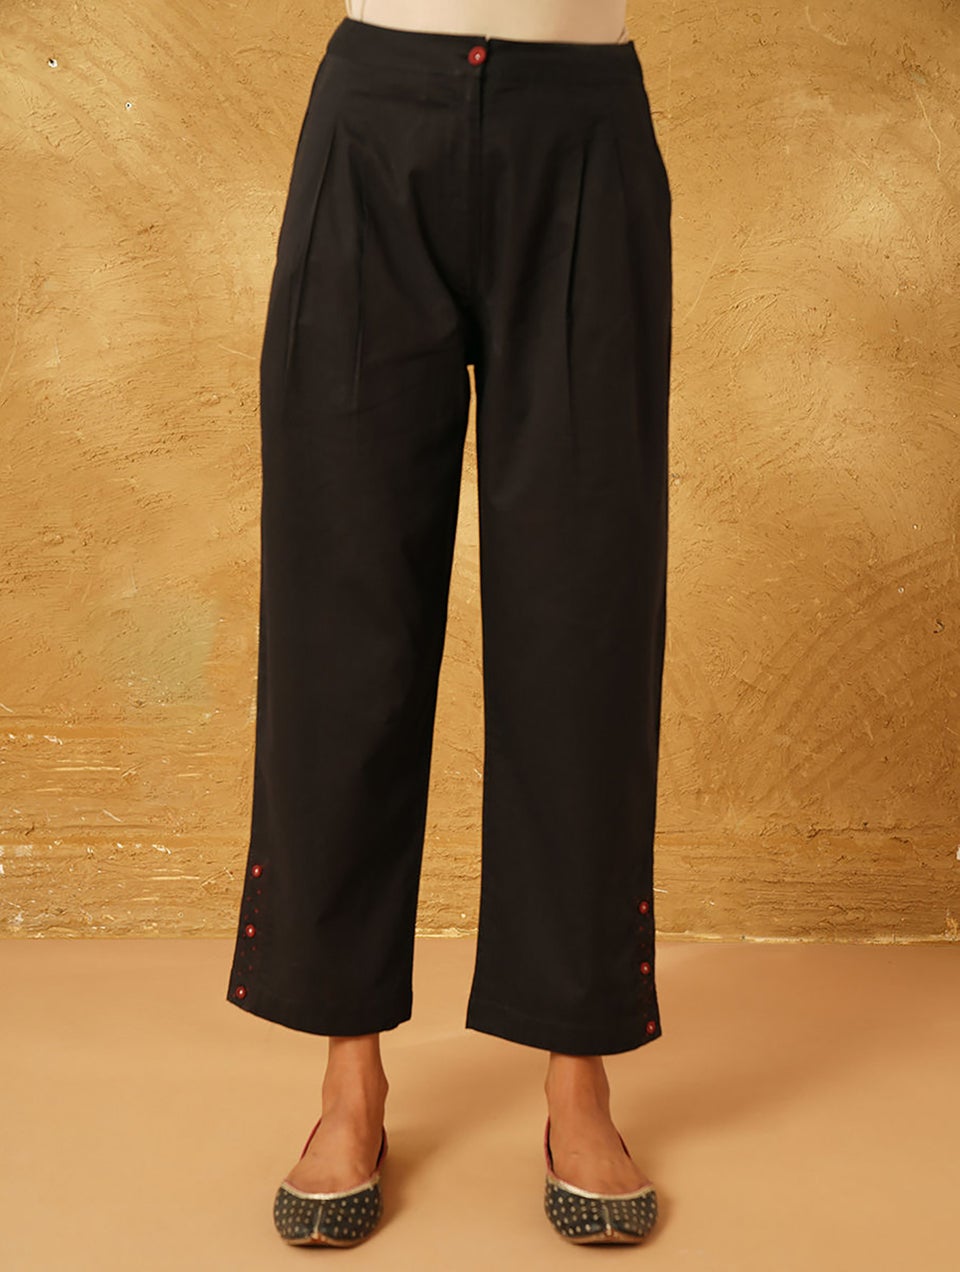 Black Natural Dyed Cotton Pants With Button Closure - XS